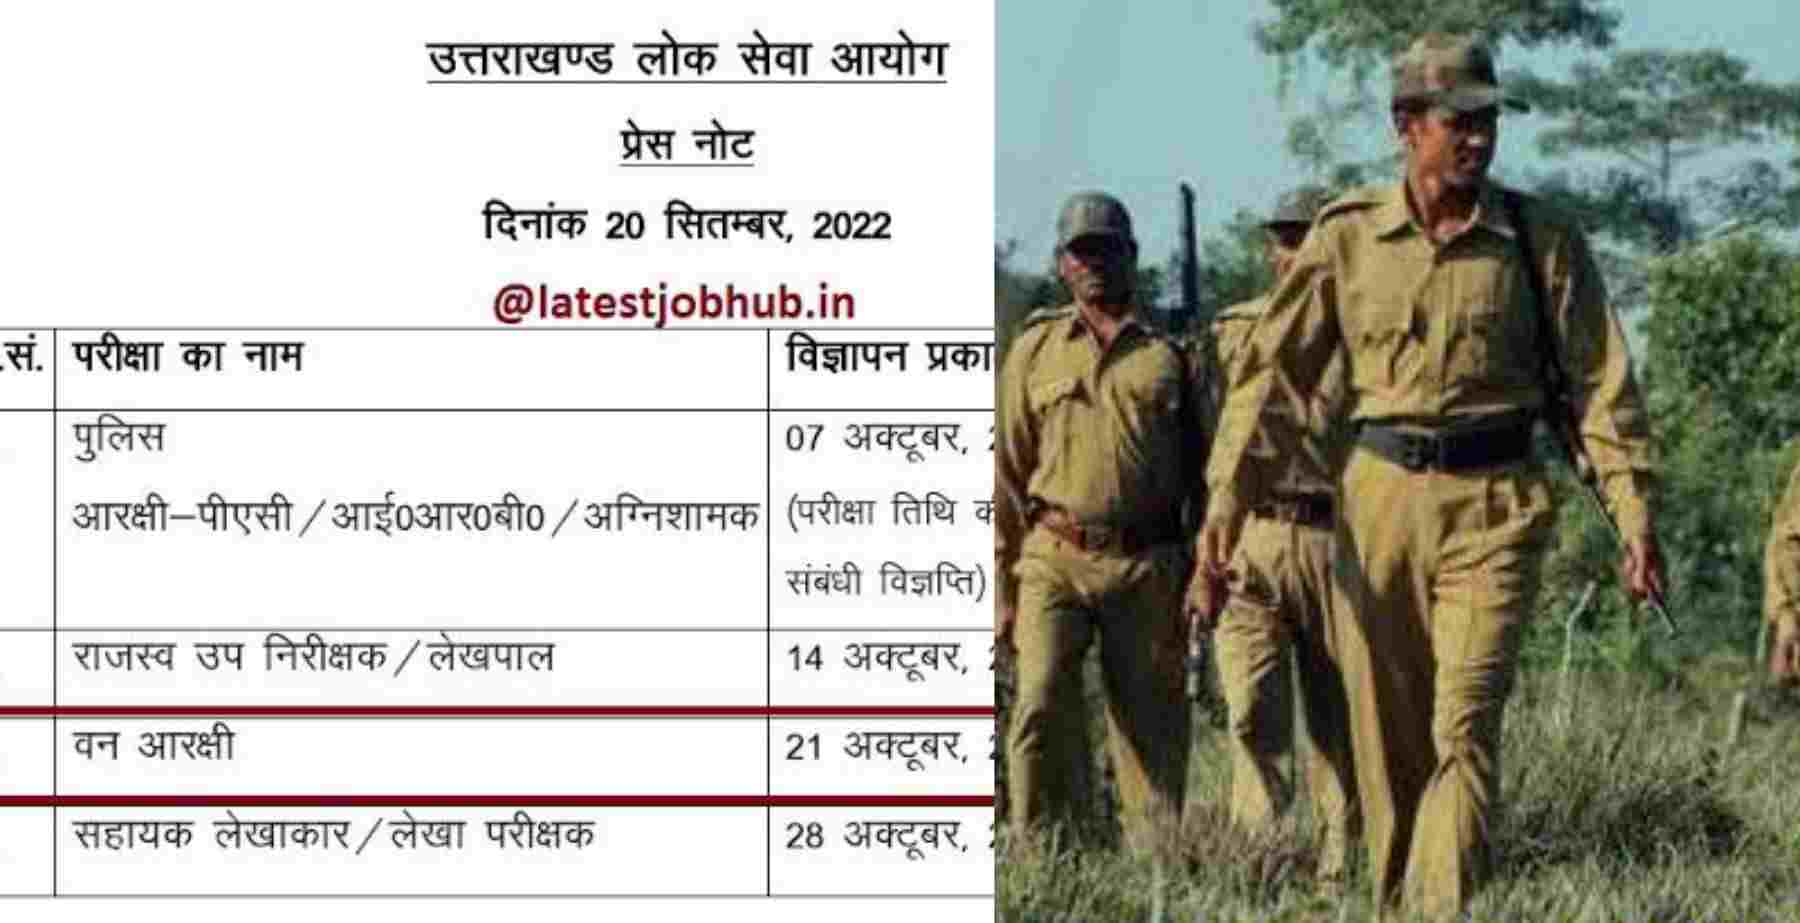 Uttarakhand Breking news: Forest Guard paper will not be held on January 22, UKPSC changed exam date. Forest Guard exam date